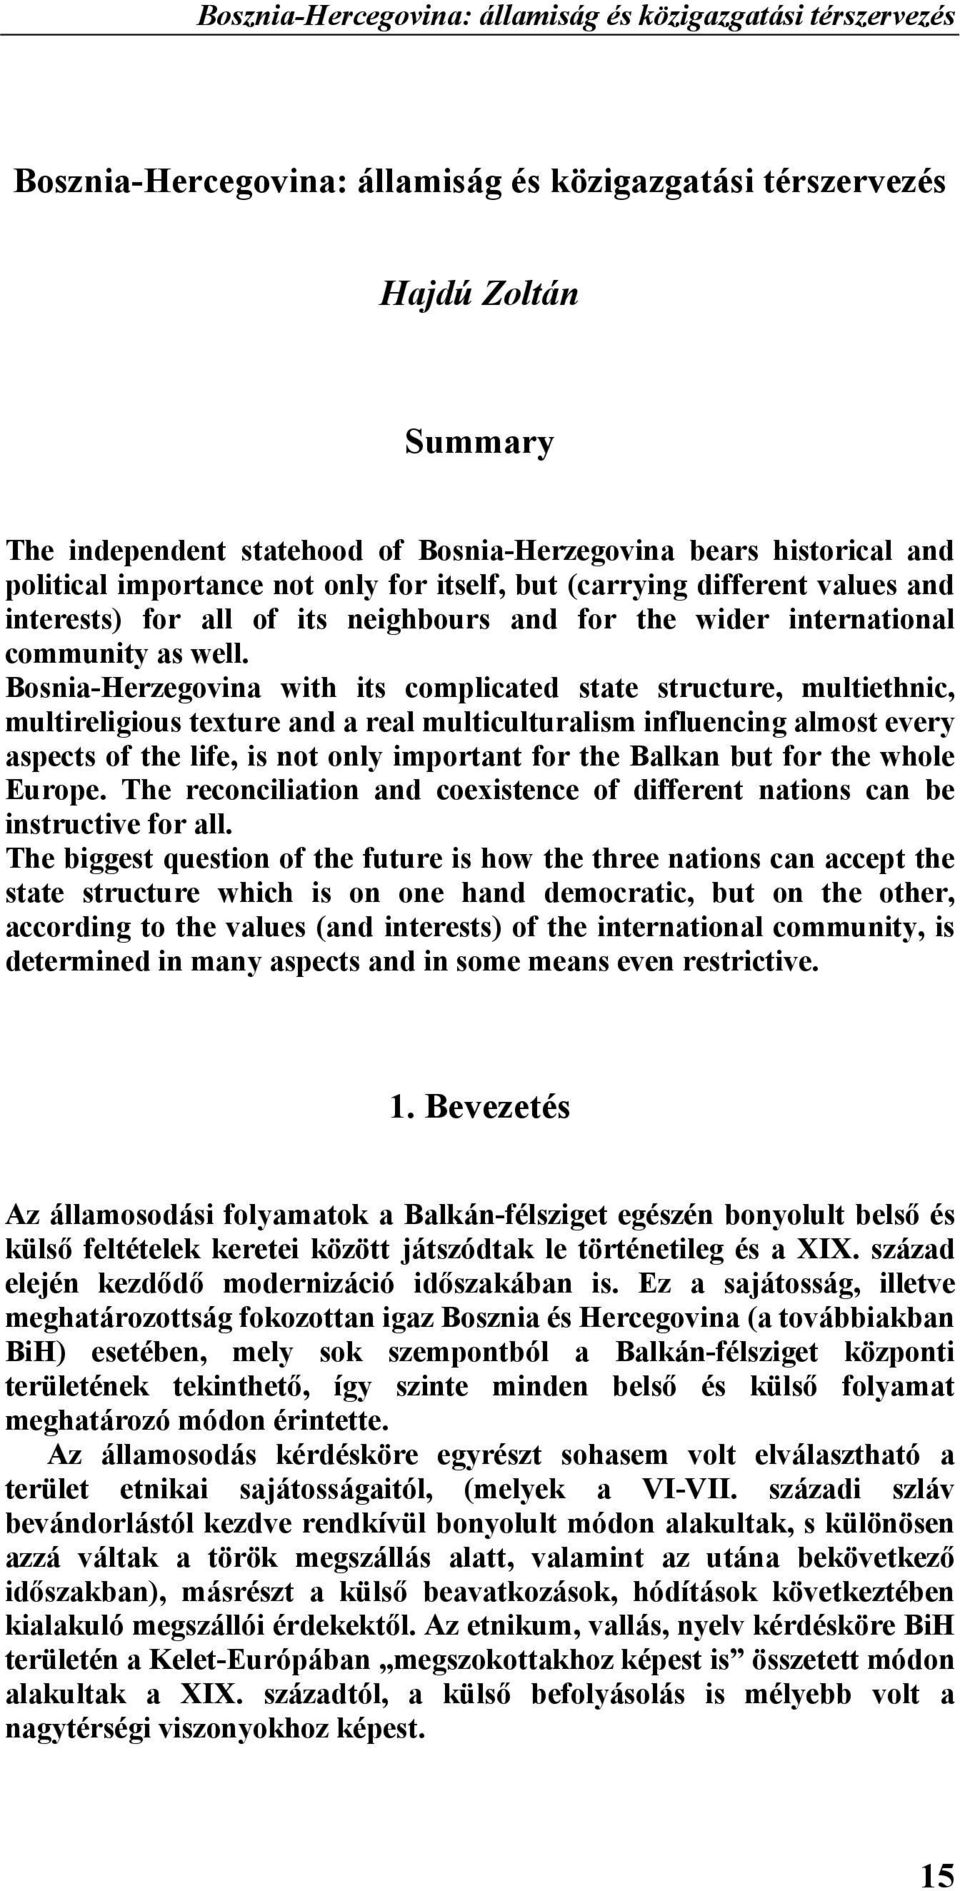 Bosnia-Herzegovina with its complicated state structure, multiethnic, multireligious texture and a real multiculturalism influencing almost every aspects of the life, is not only important for the